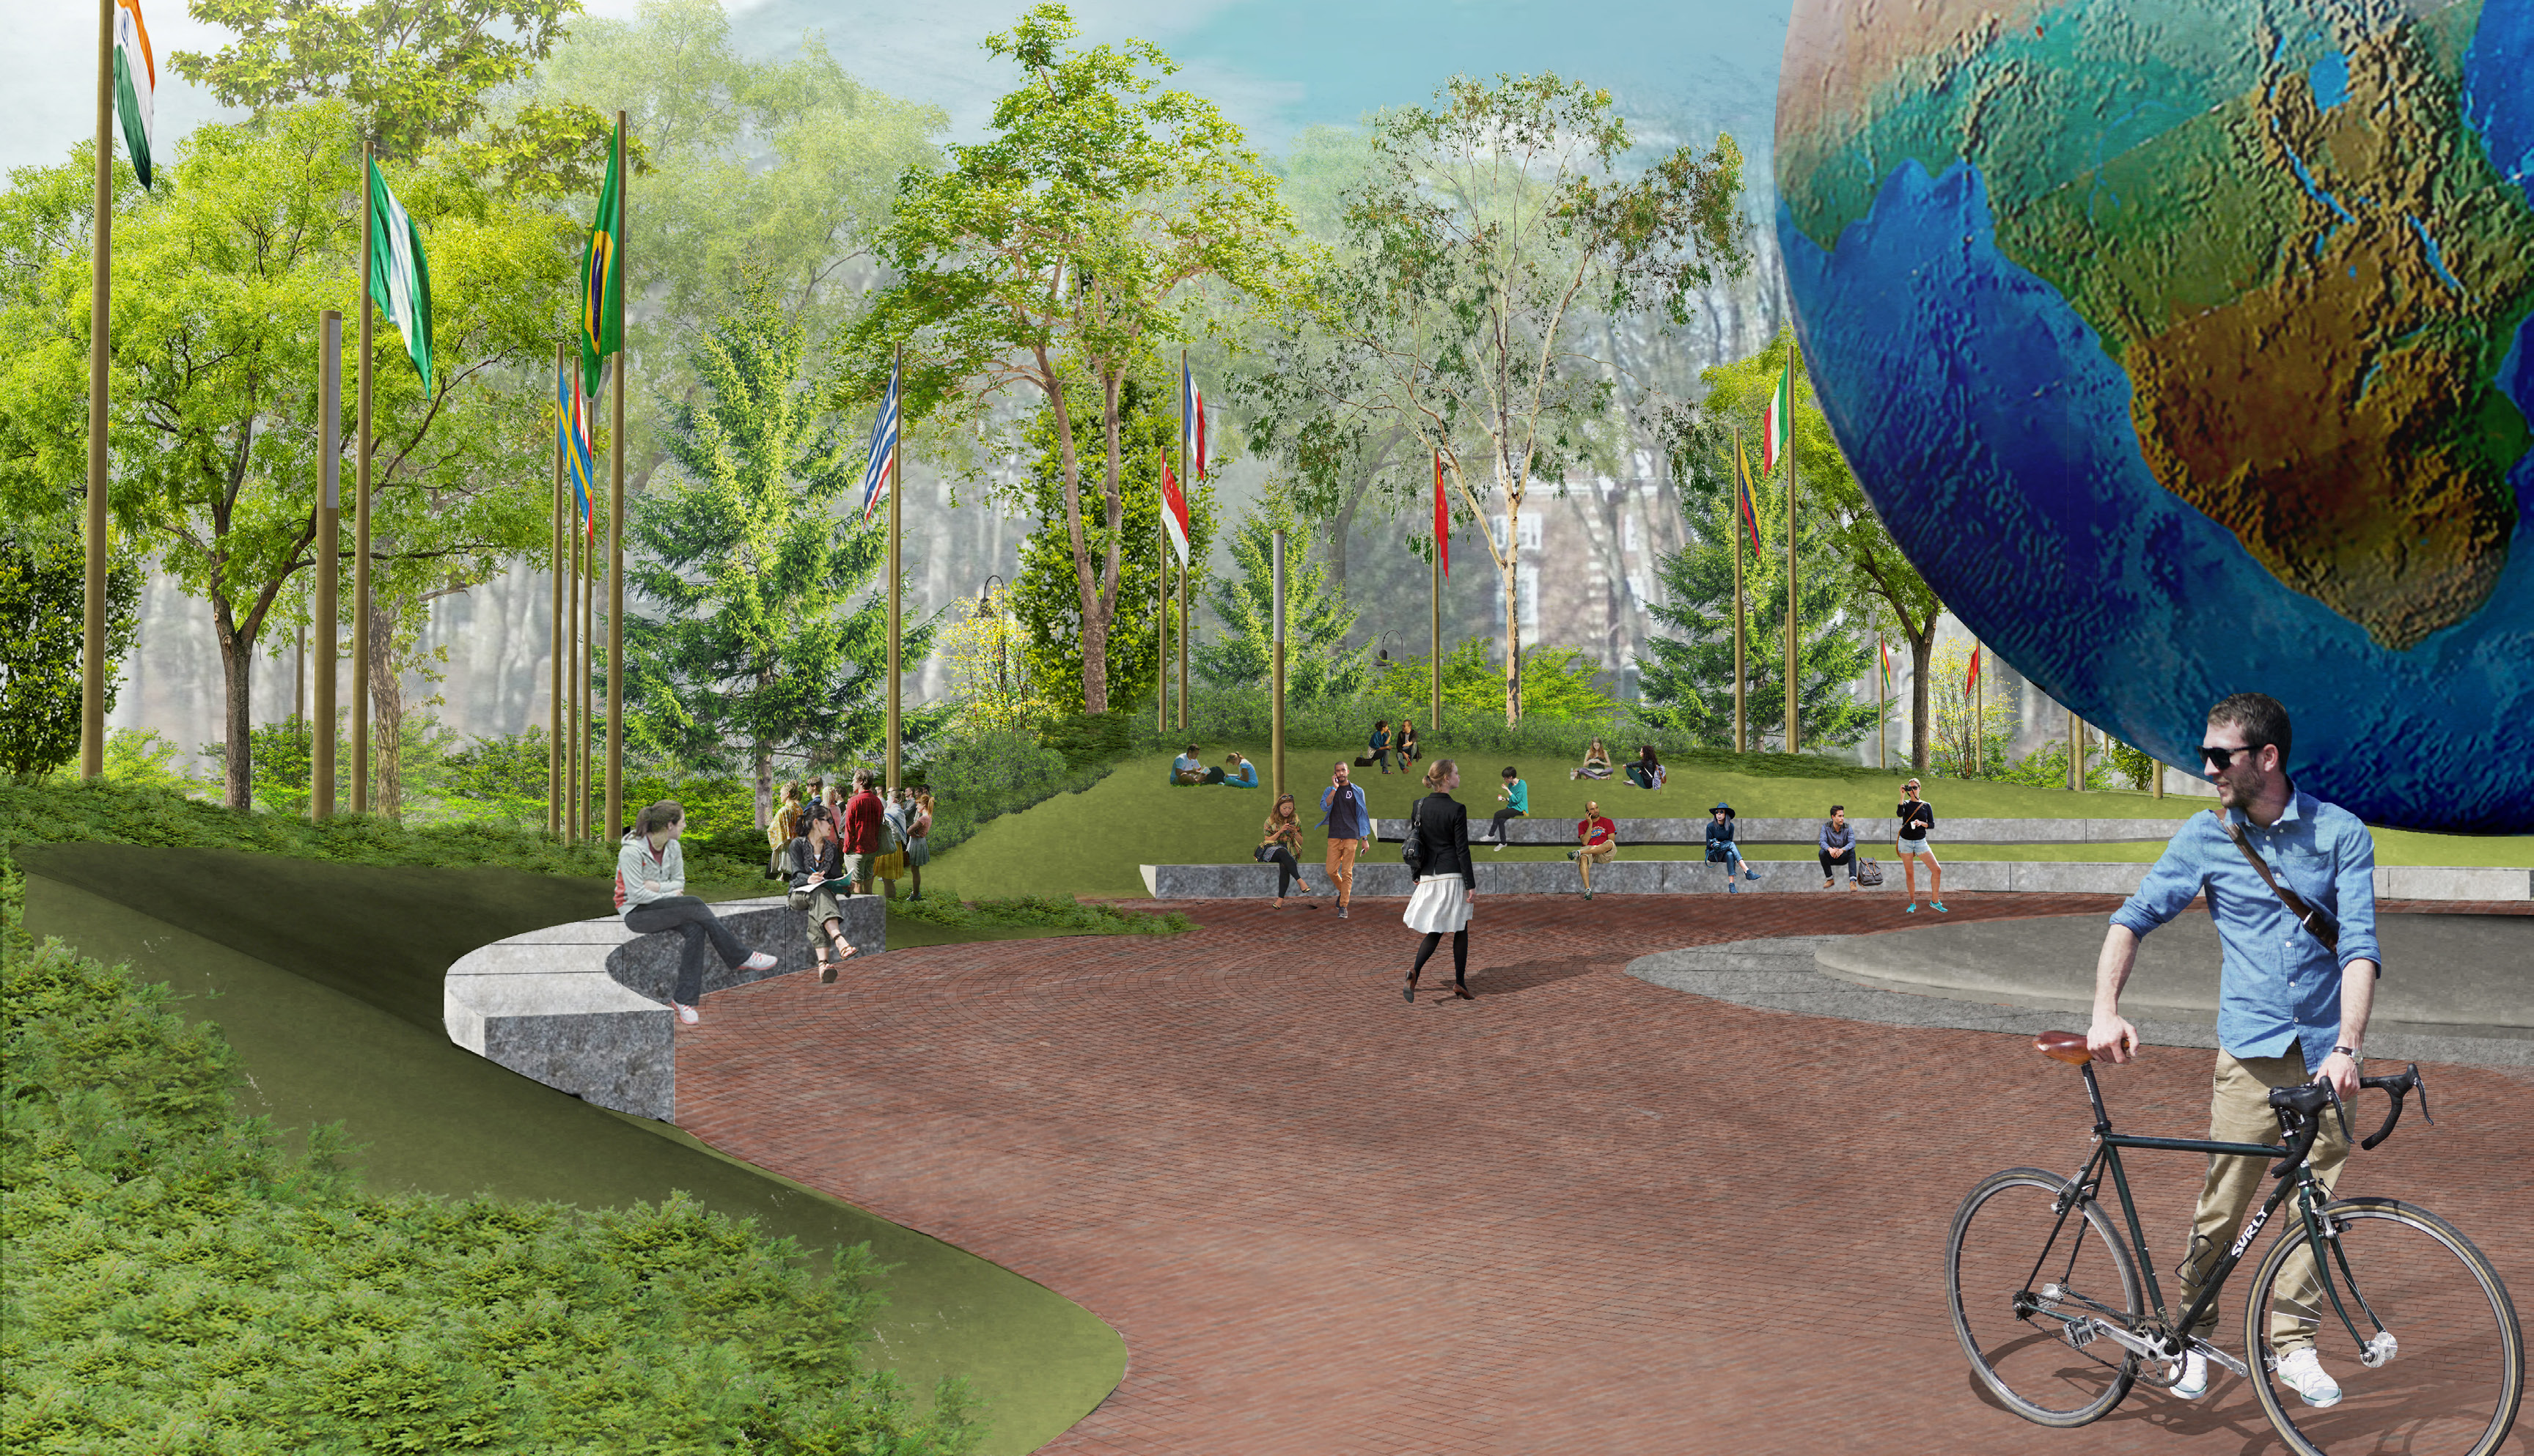 As part of the project the Babson World Globe will be refurbished. 